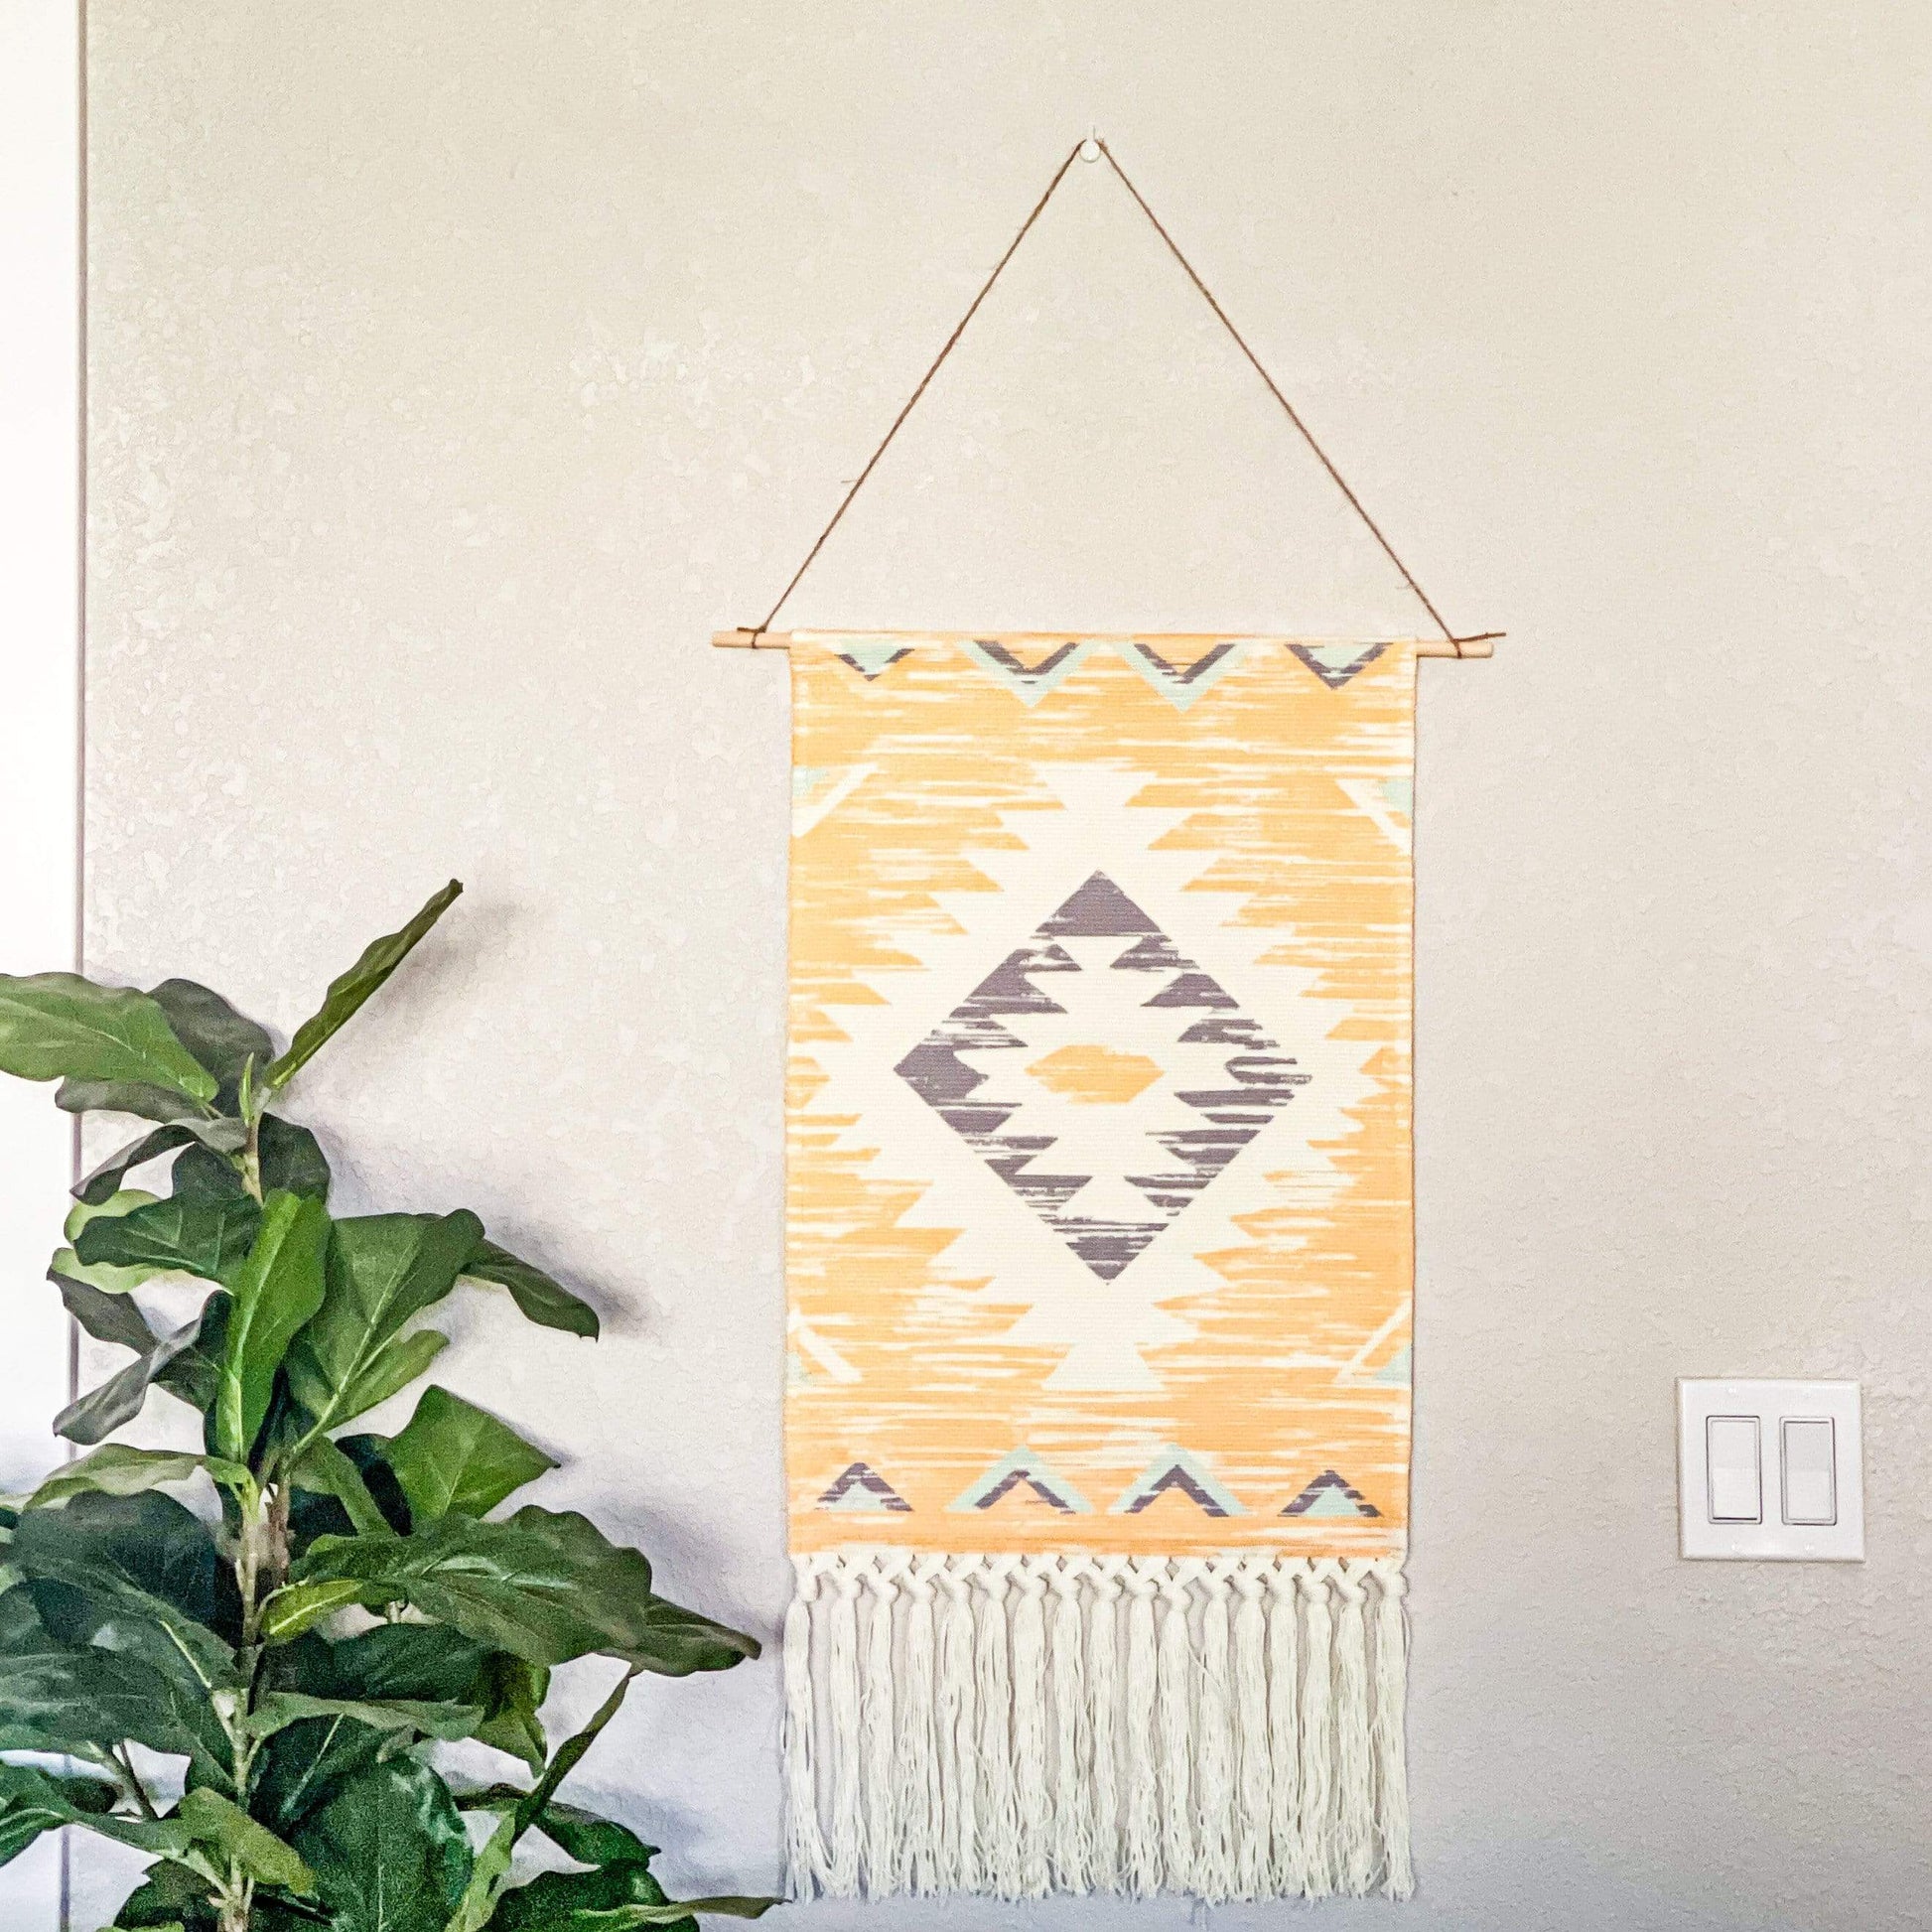 Woven Wall Hanging - home decor